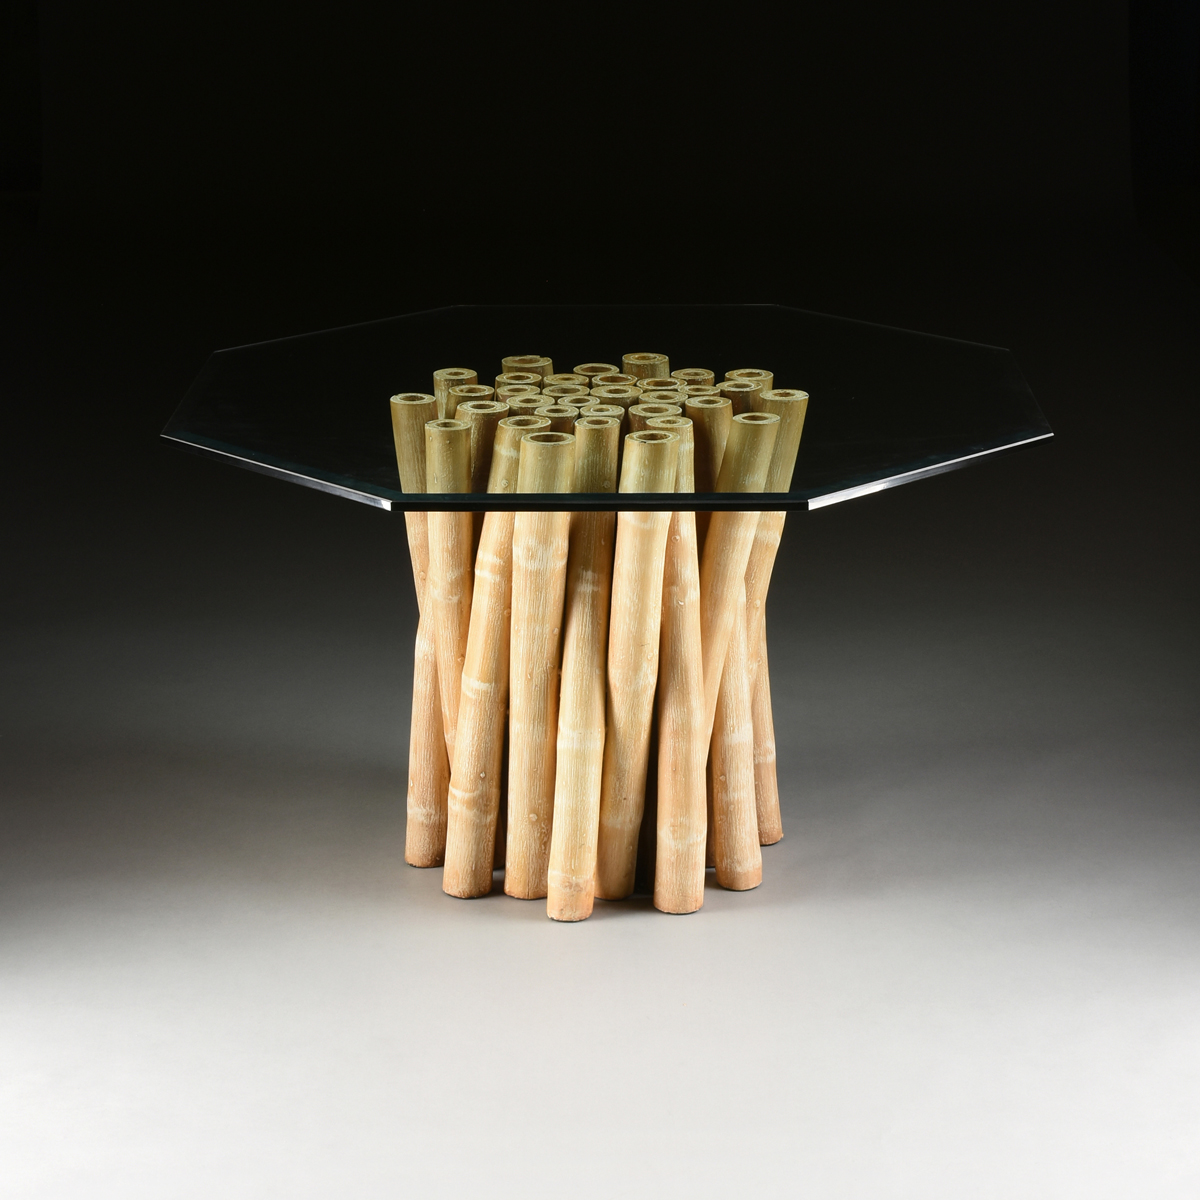 A VINTAGE MODERN AMERICAN GLASS TOPPED AND WHITEWASHED BAMBOO CENTER TABLE, BY BUDJI LAYUG, CIRCA